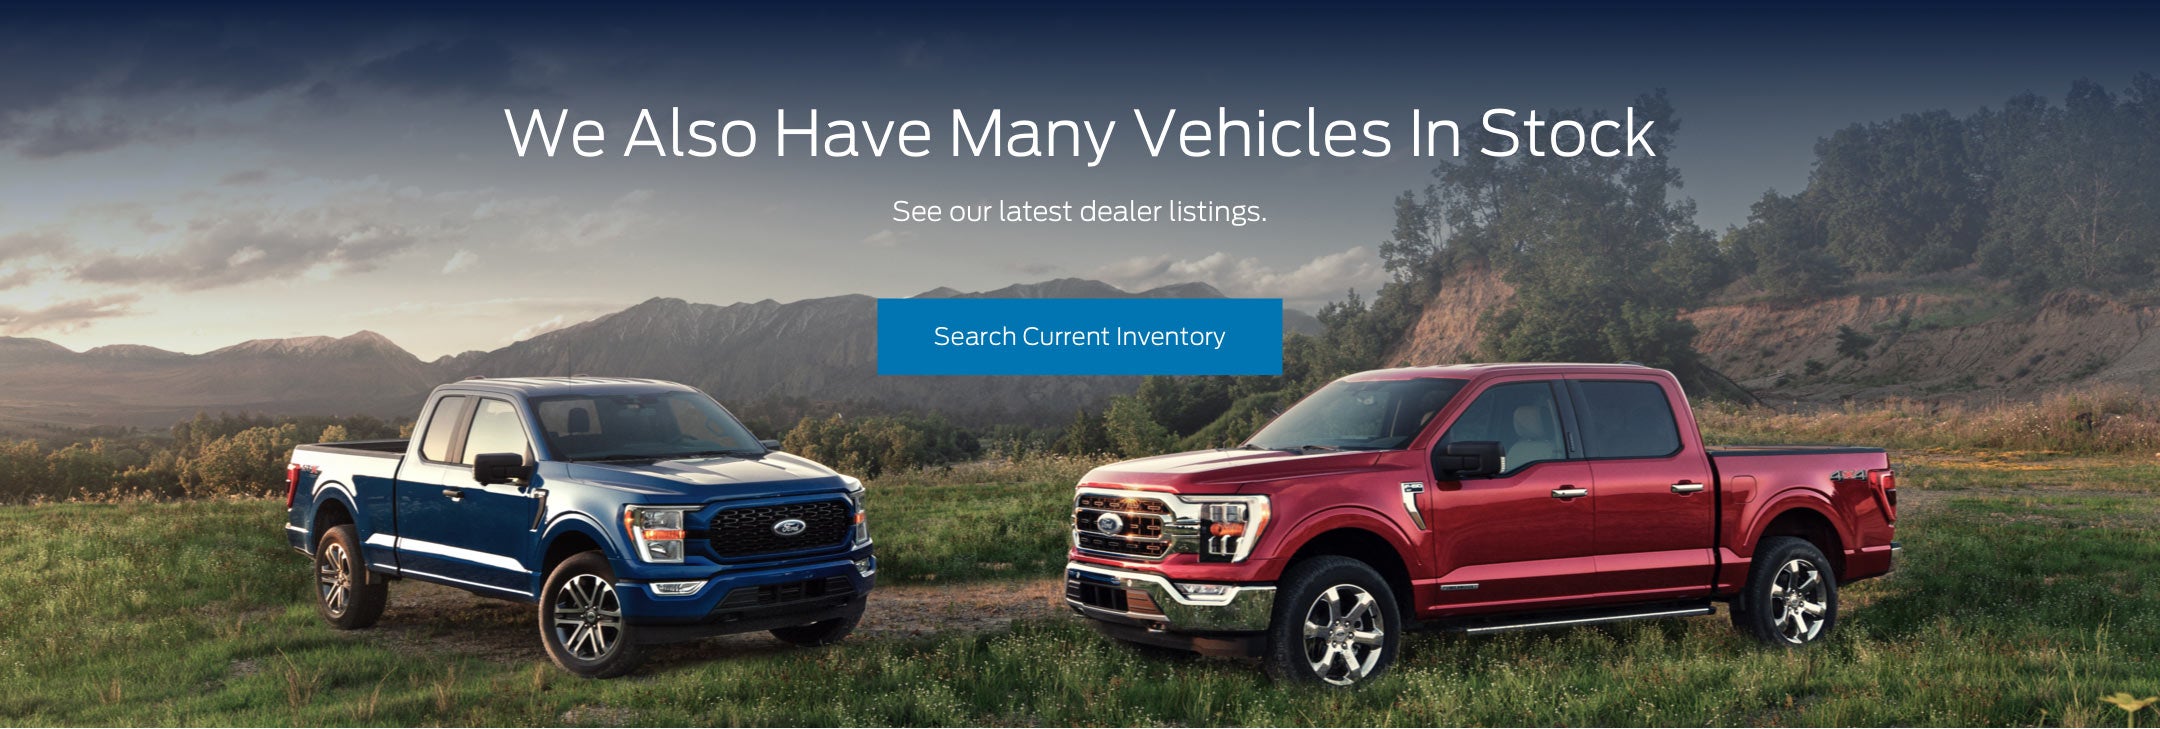 Ford vehicles in stock | Sarchione Ford of Randolph in Randolph OH